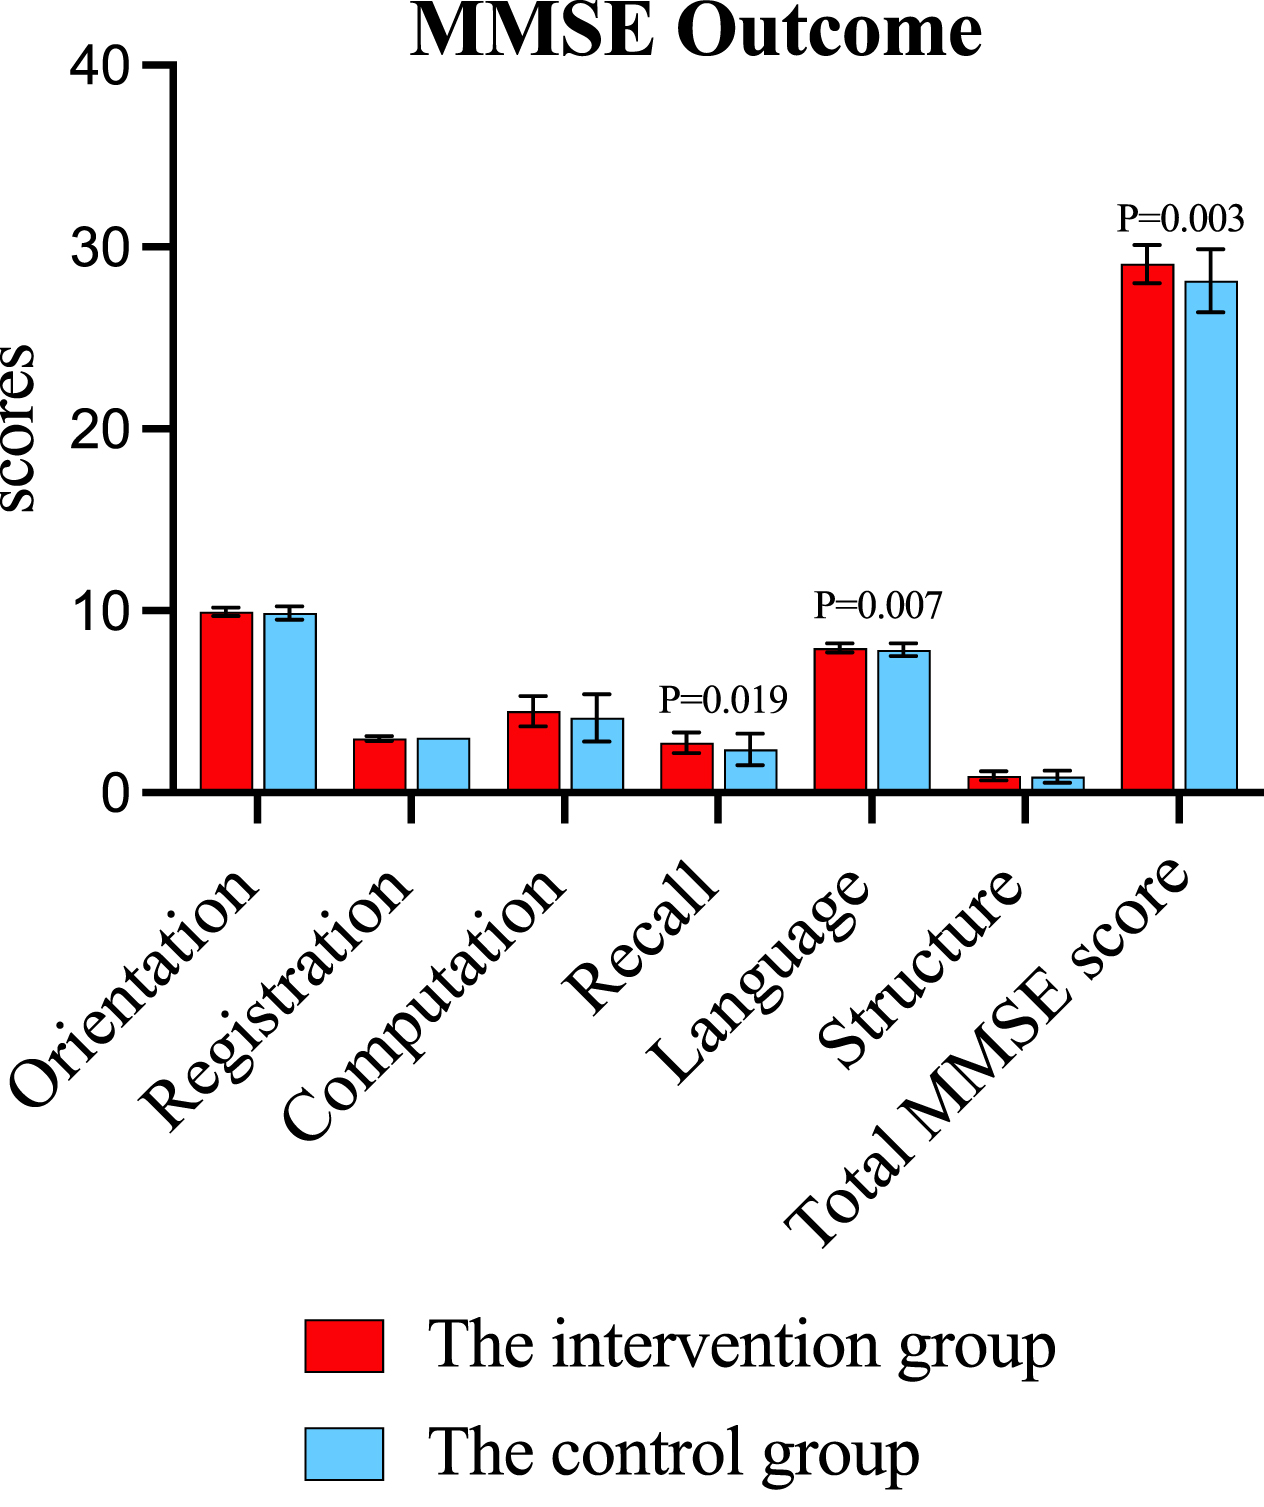 Outcomes of MMSE total and sub-scores in the intervention and control group.